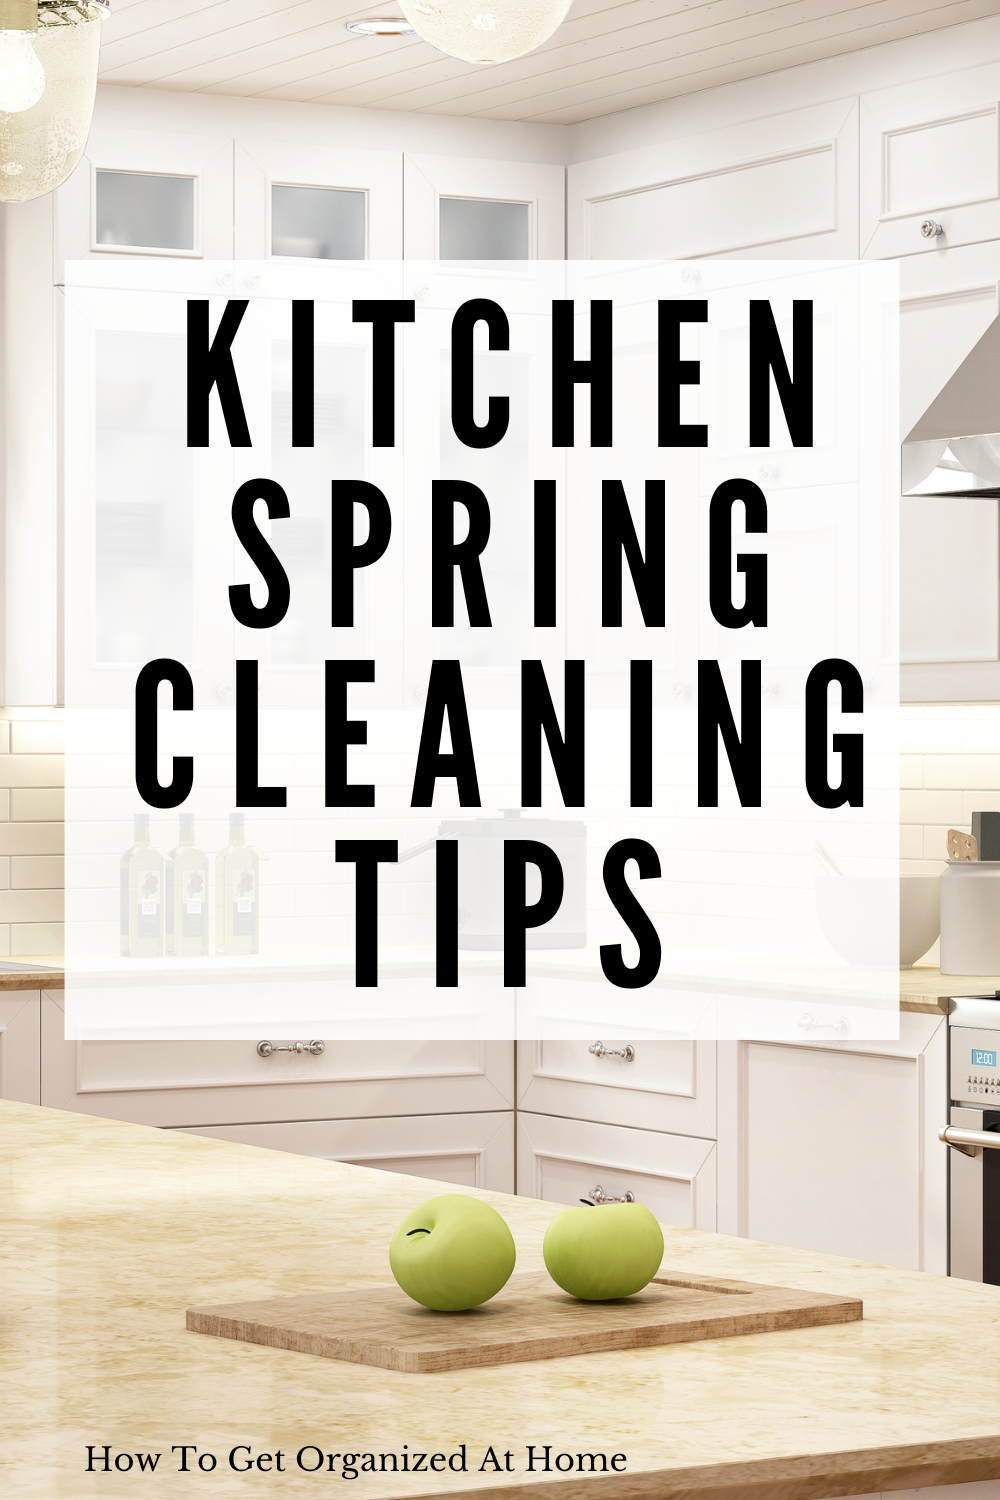 12 Amazing Kitchen Cleaning Tips and Hacks